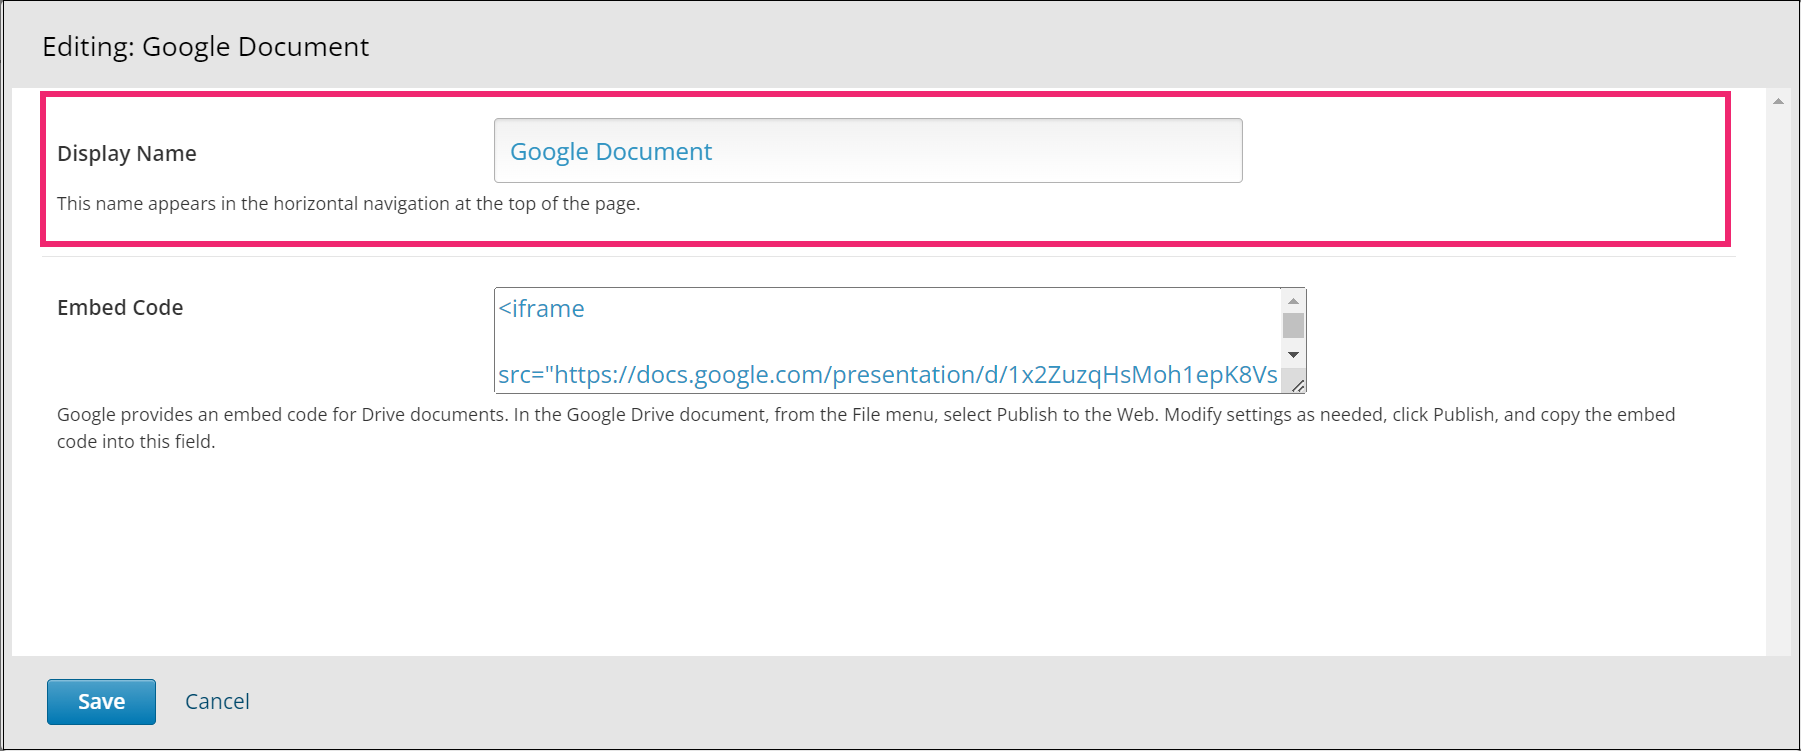 This image shows the editor window and the options to set up the Google Documents XBlock.